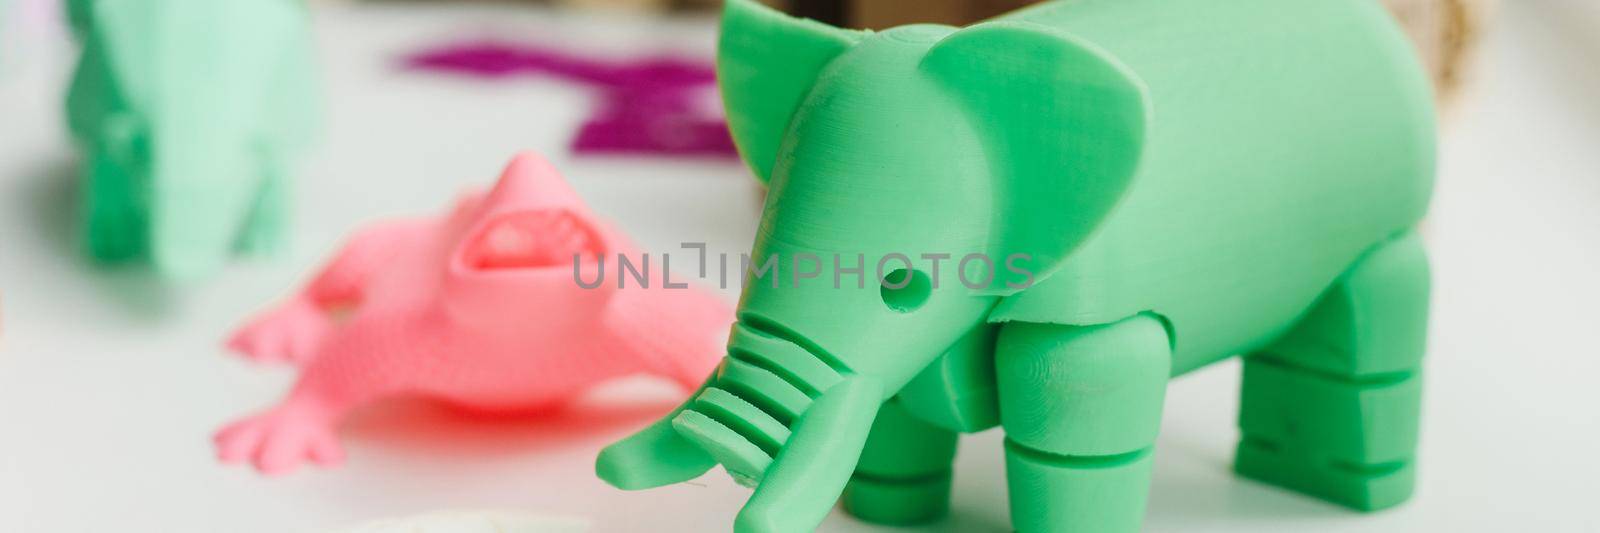 3D figures printed on an elephant, lizard, and snail printer. 3d toys for children. Web banner.